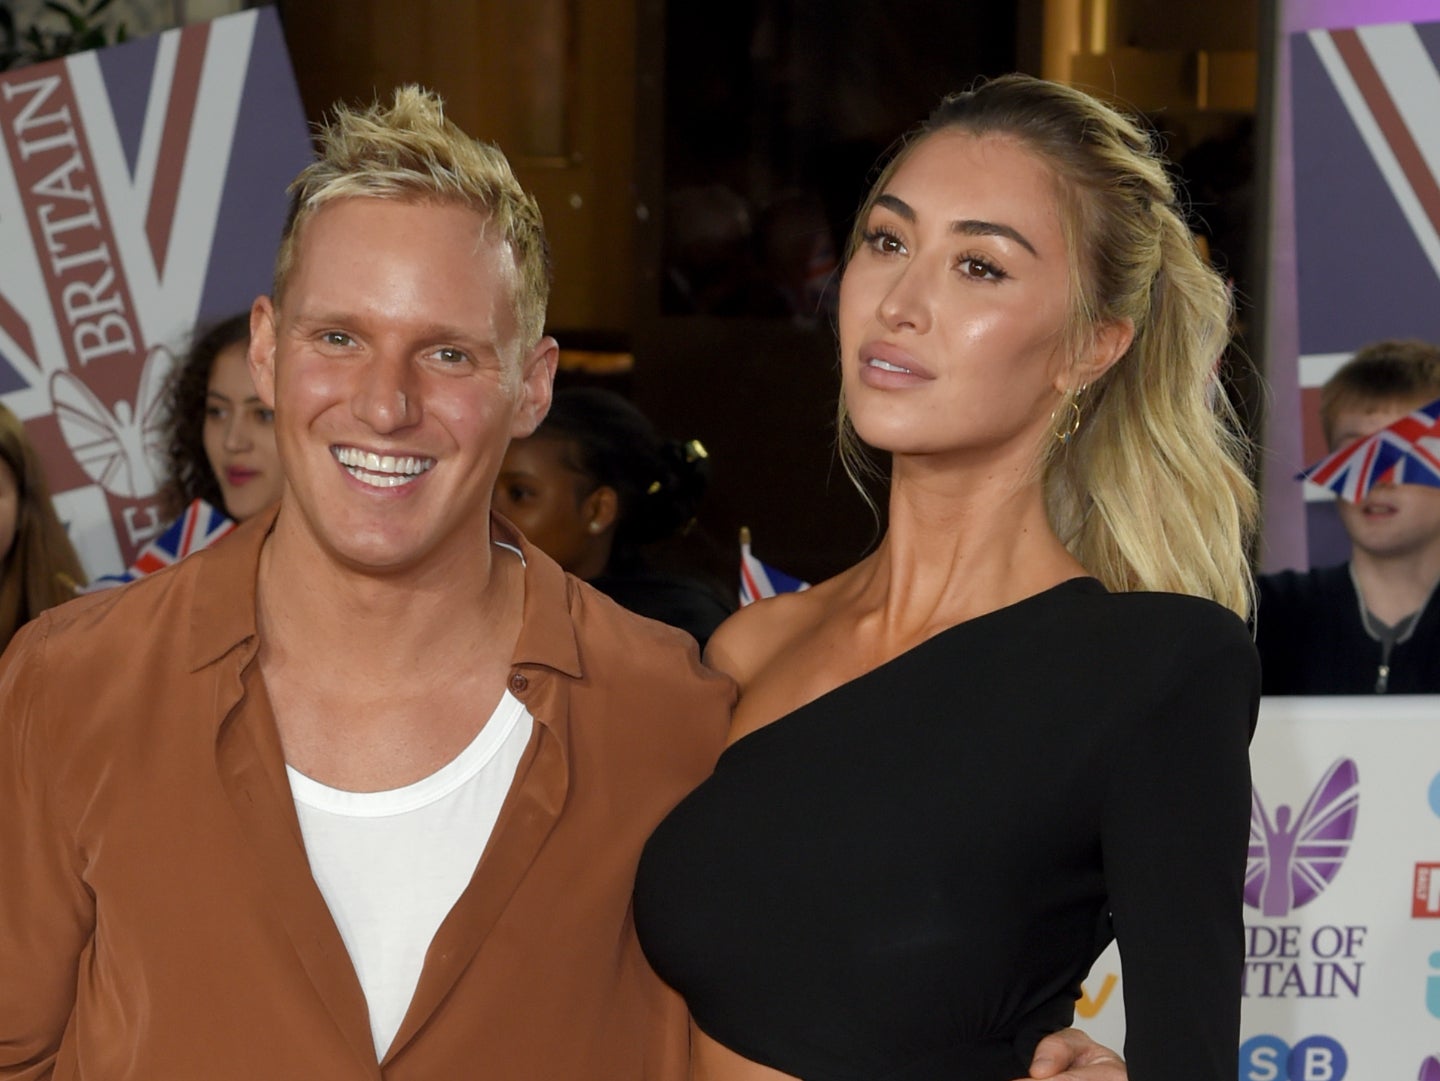 Jamie Laing and fiancée Sophie Habboo announced their engagement in December 2021